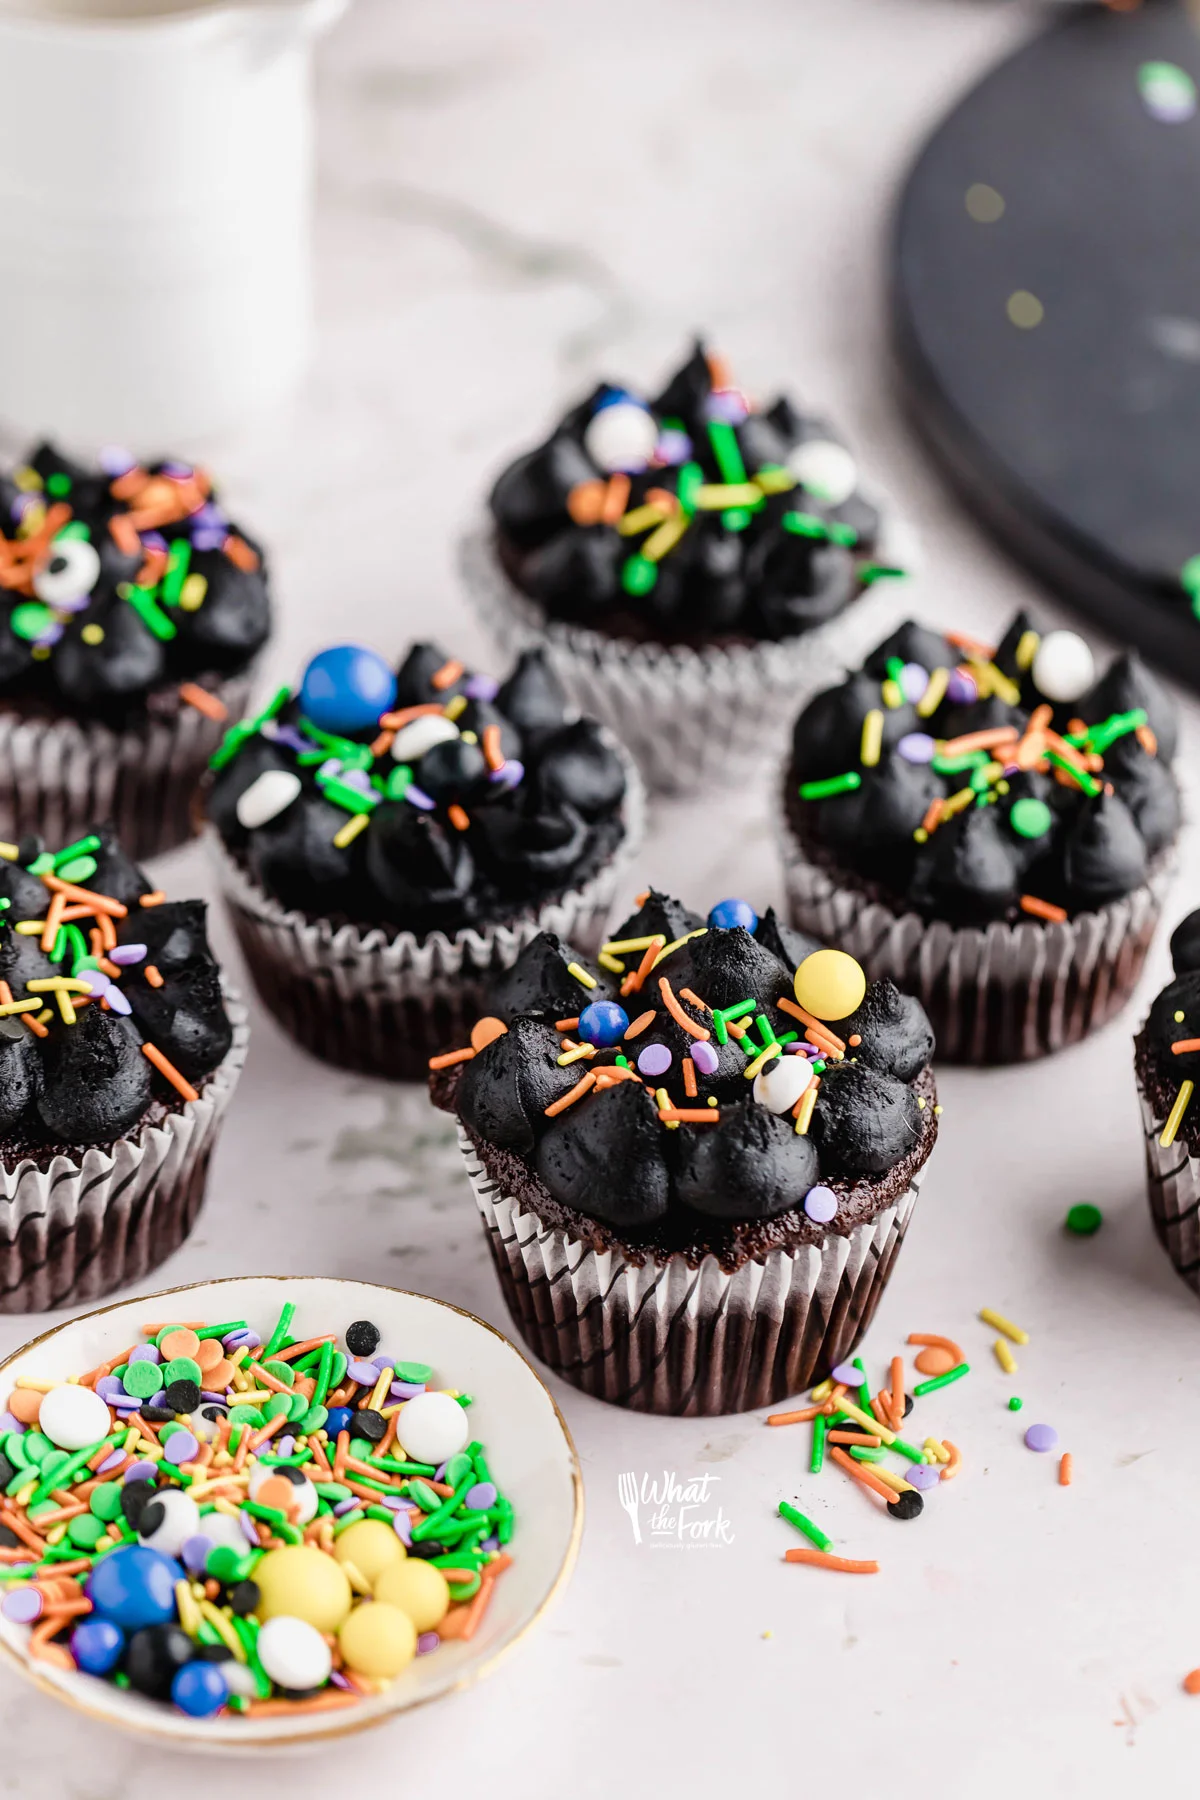 Black Frosting Recipe (American Buttercream) used to decorate chocolate cupcakes in white paper liners that are decorated with Halloween sprinkles